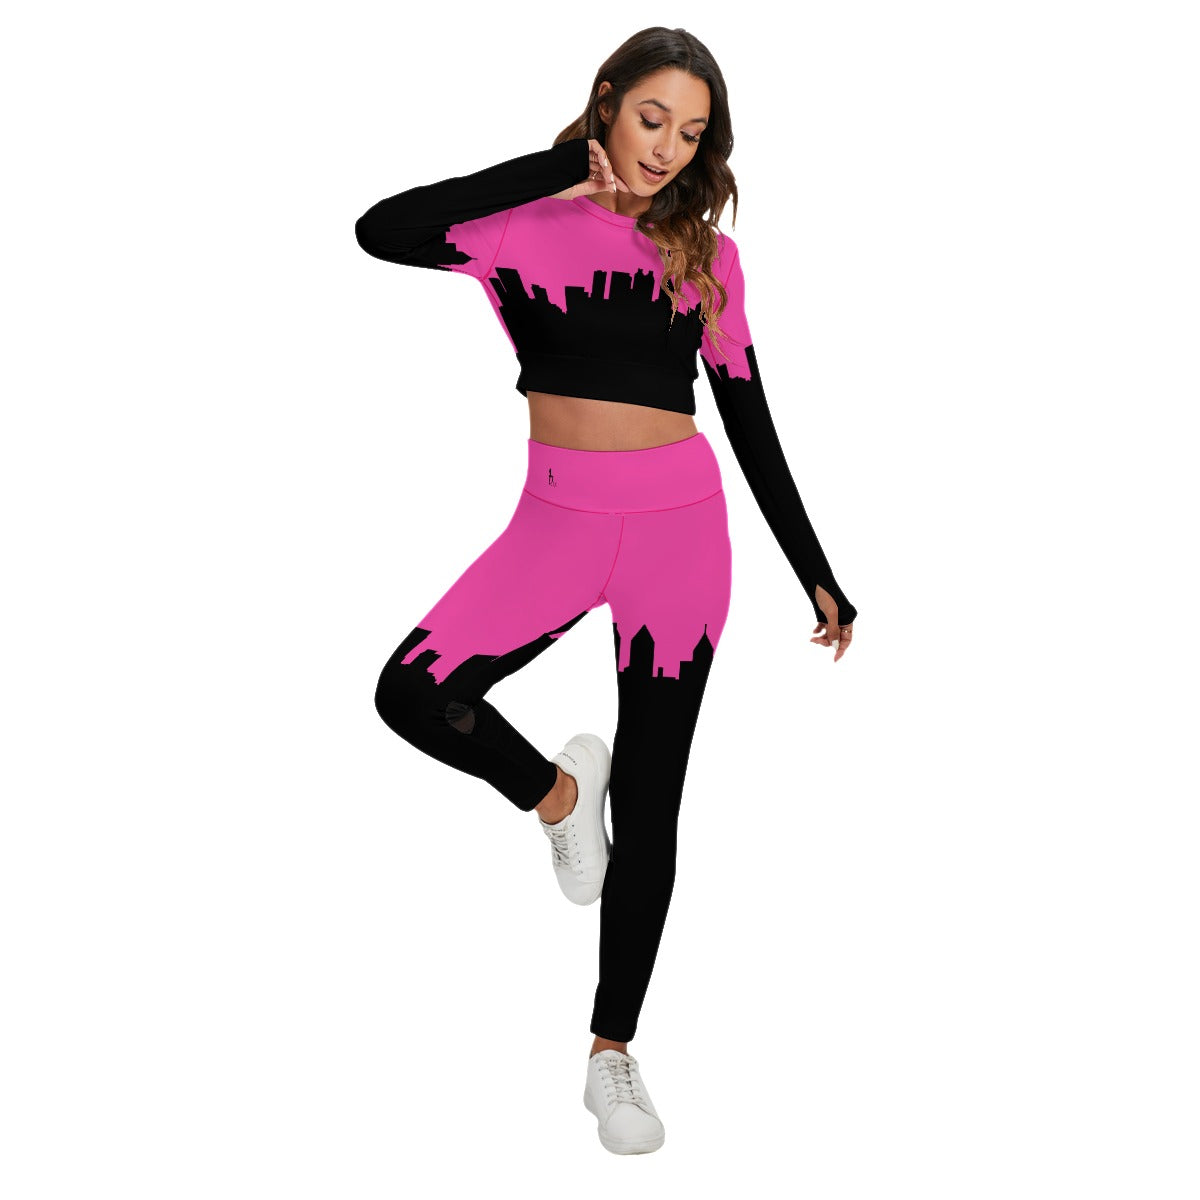 Officially Sexy Neon Pink & Black Skyline Women's Sport Set With Backless Top And Leggings